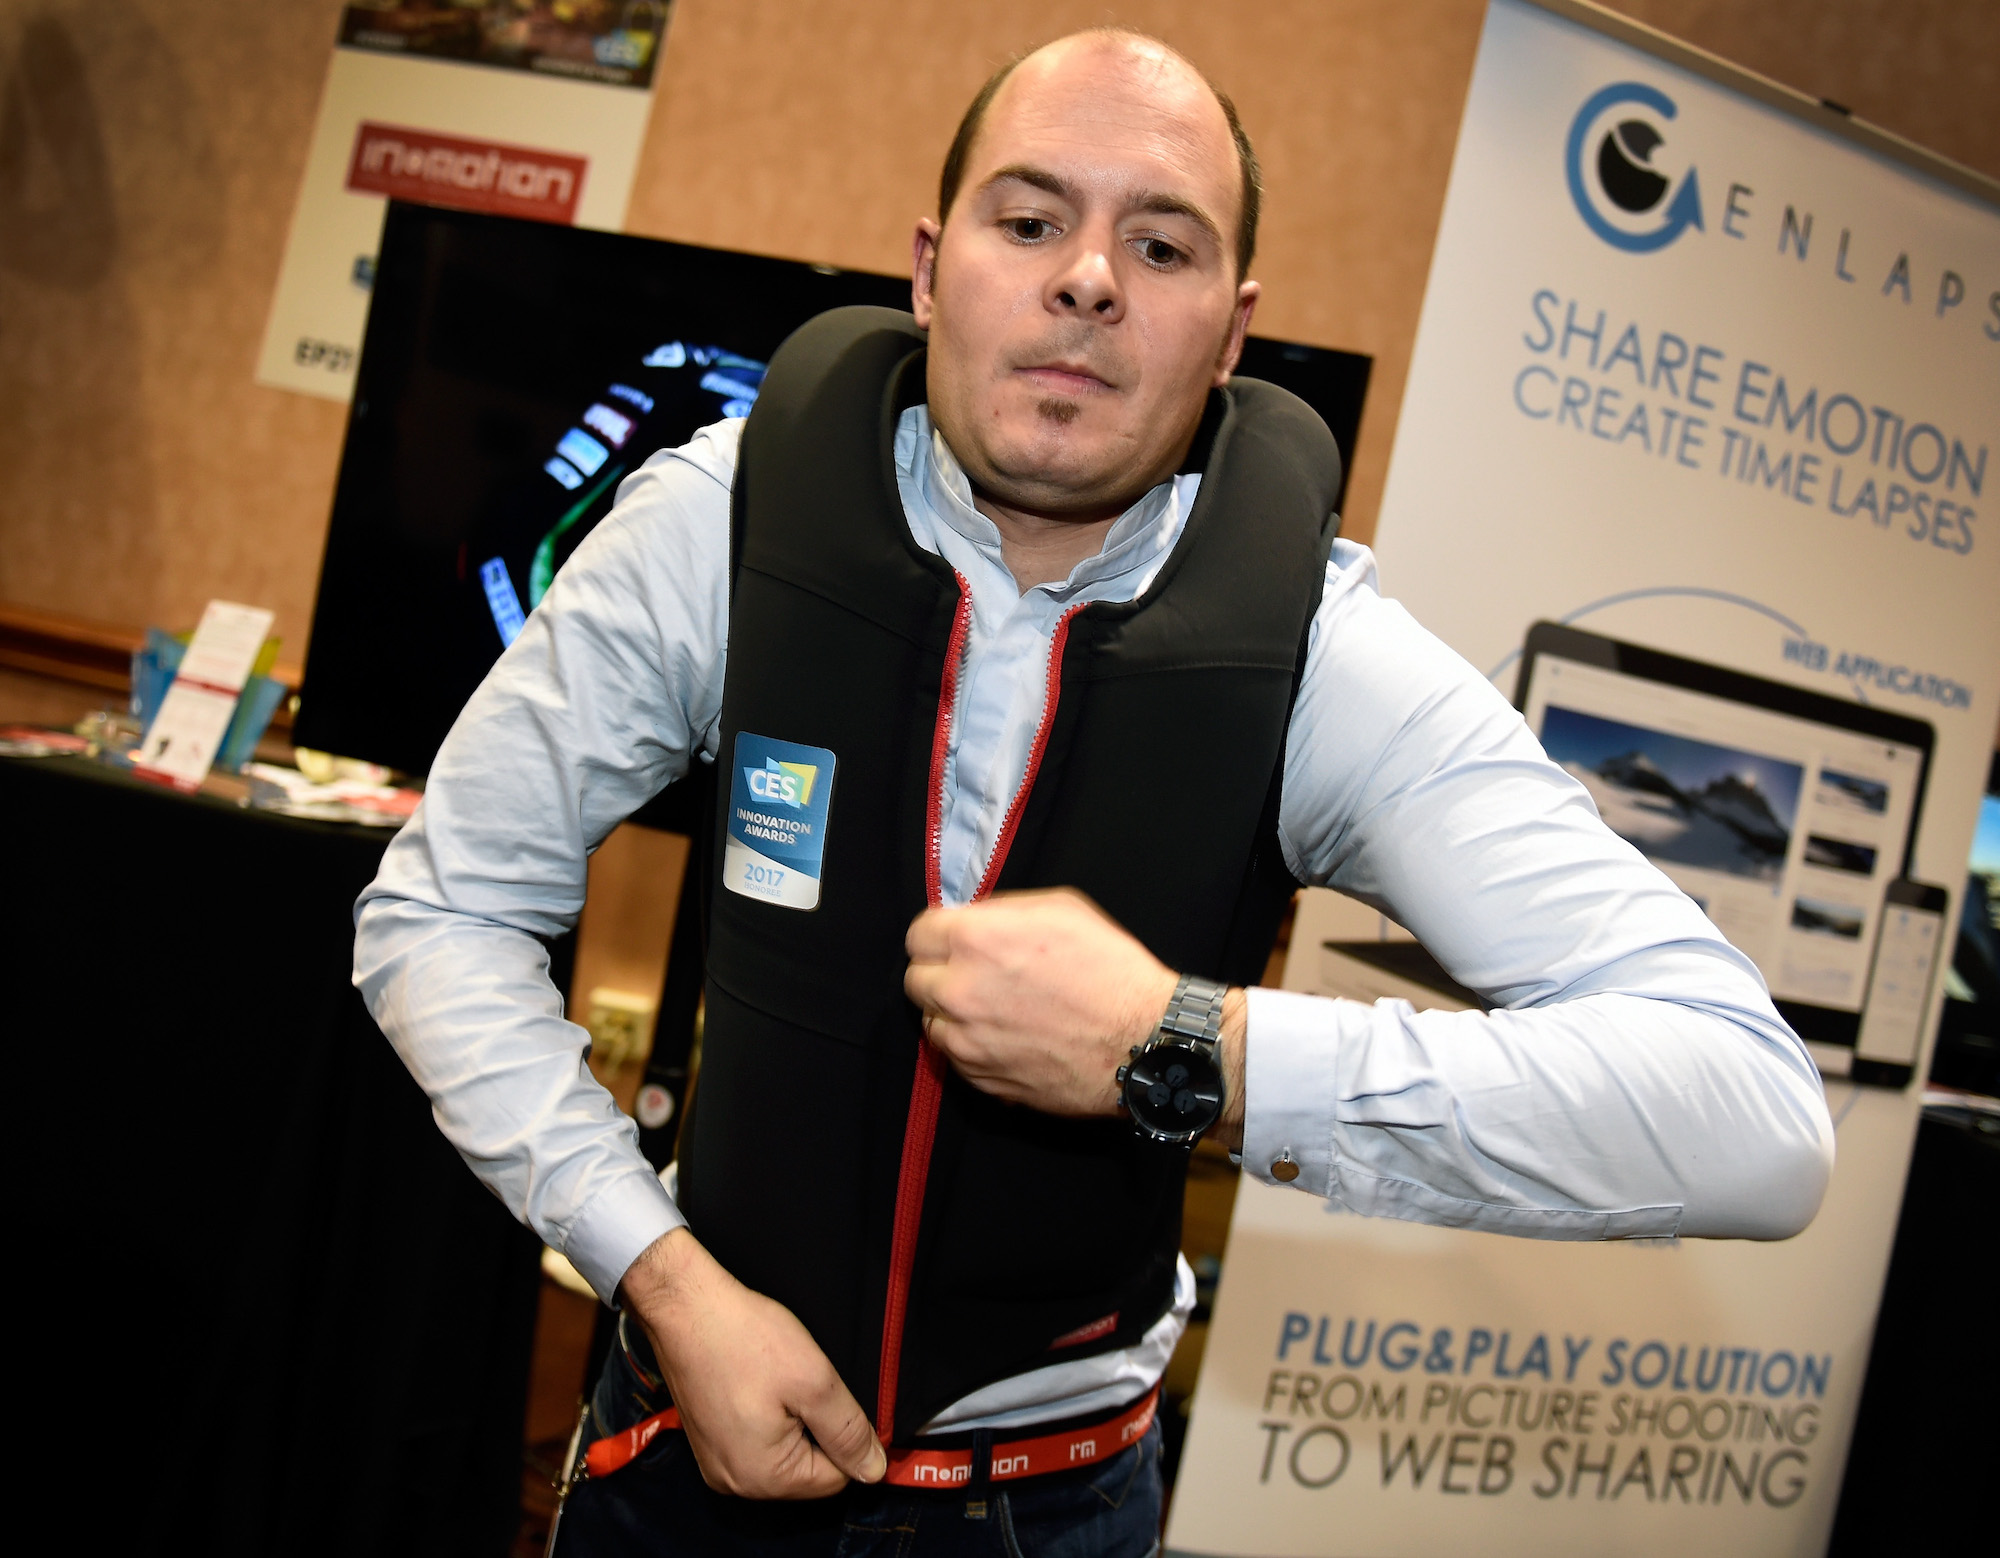 Pierre-François Tissot wears an In&motion smart motorcycle airbag vest during a press event for CES 2017 in Las Vegas, Nevada